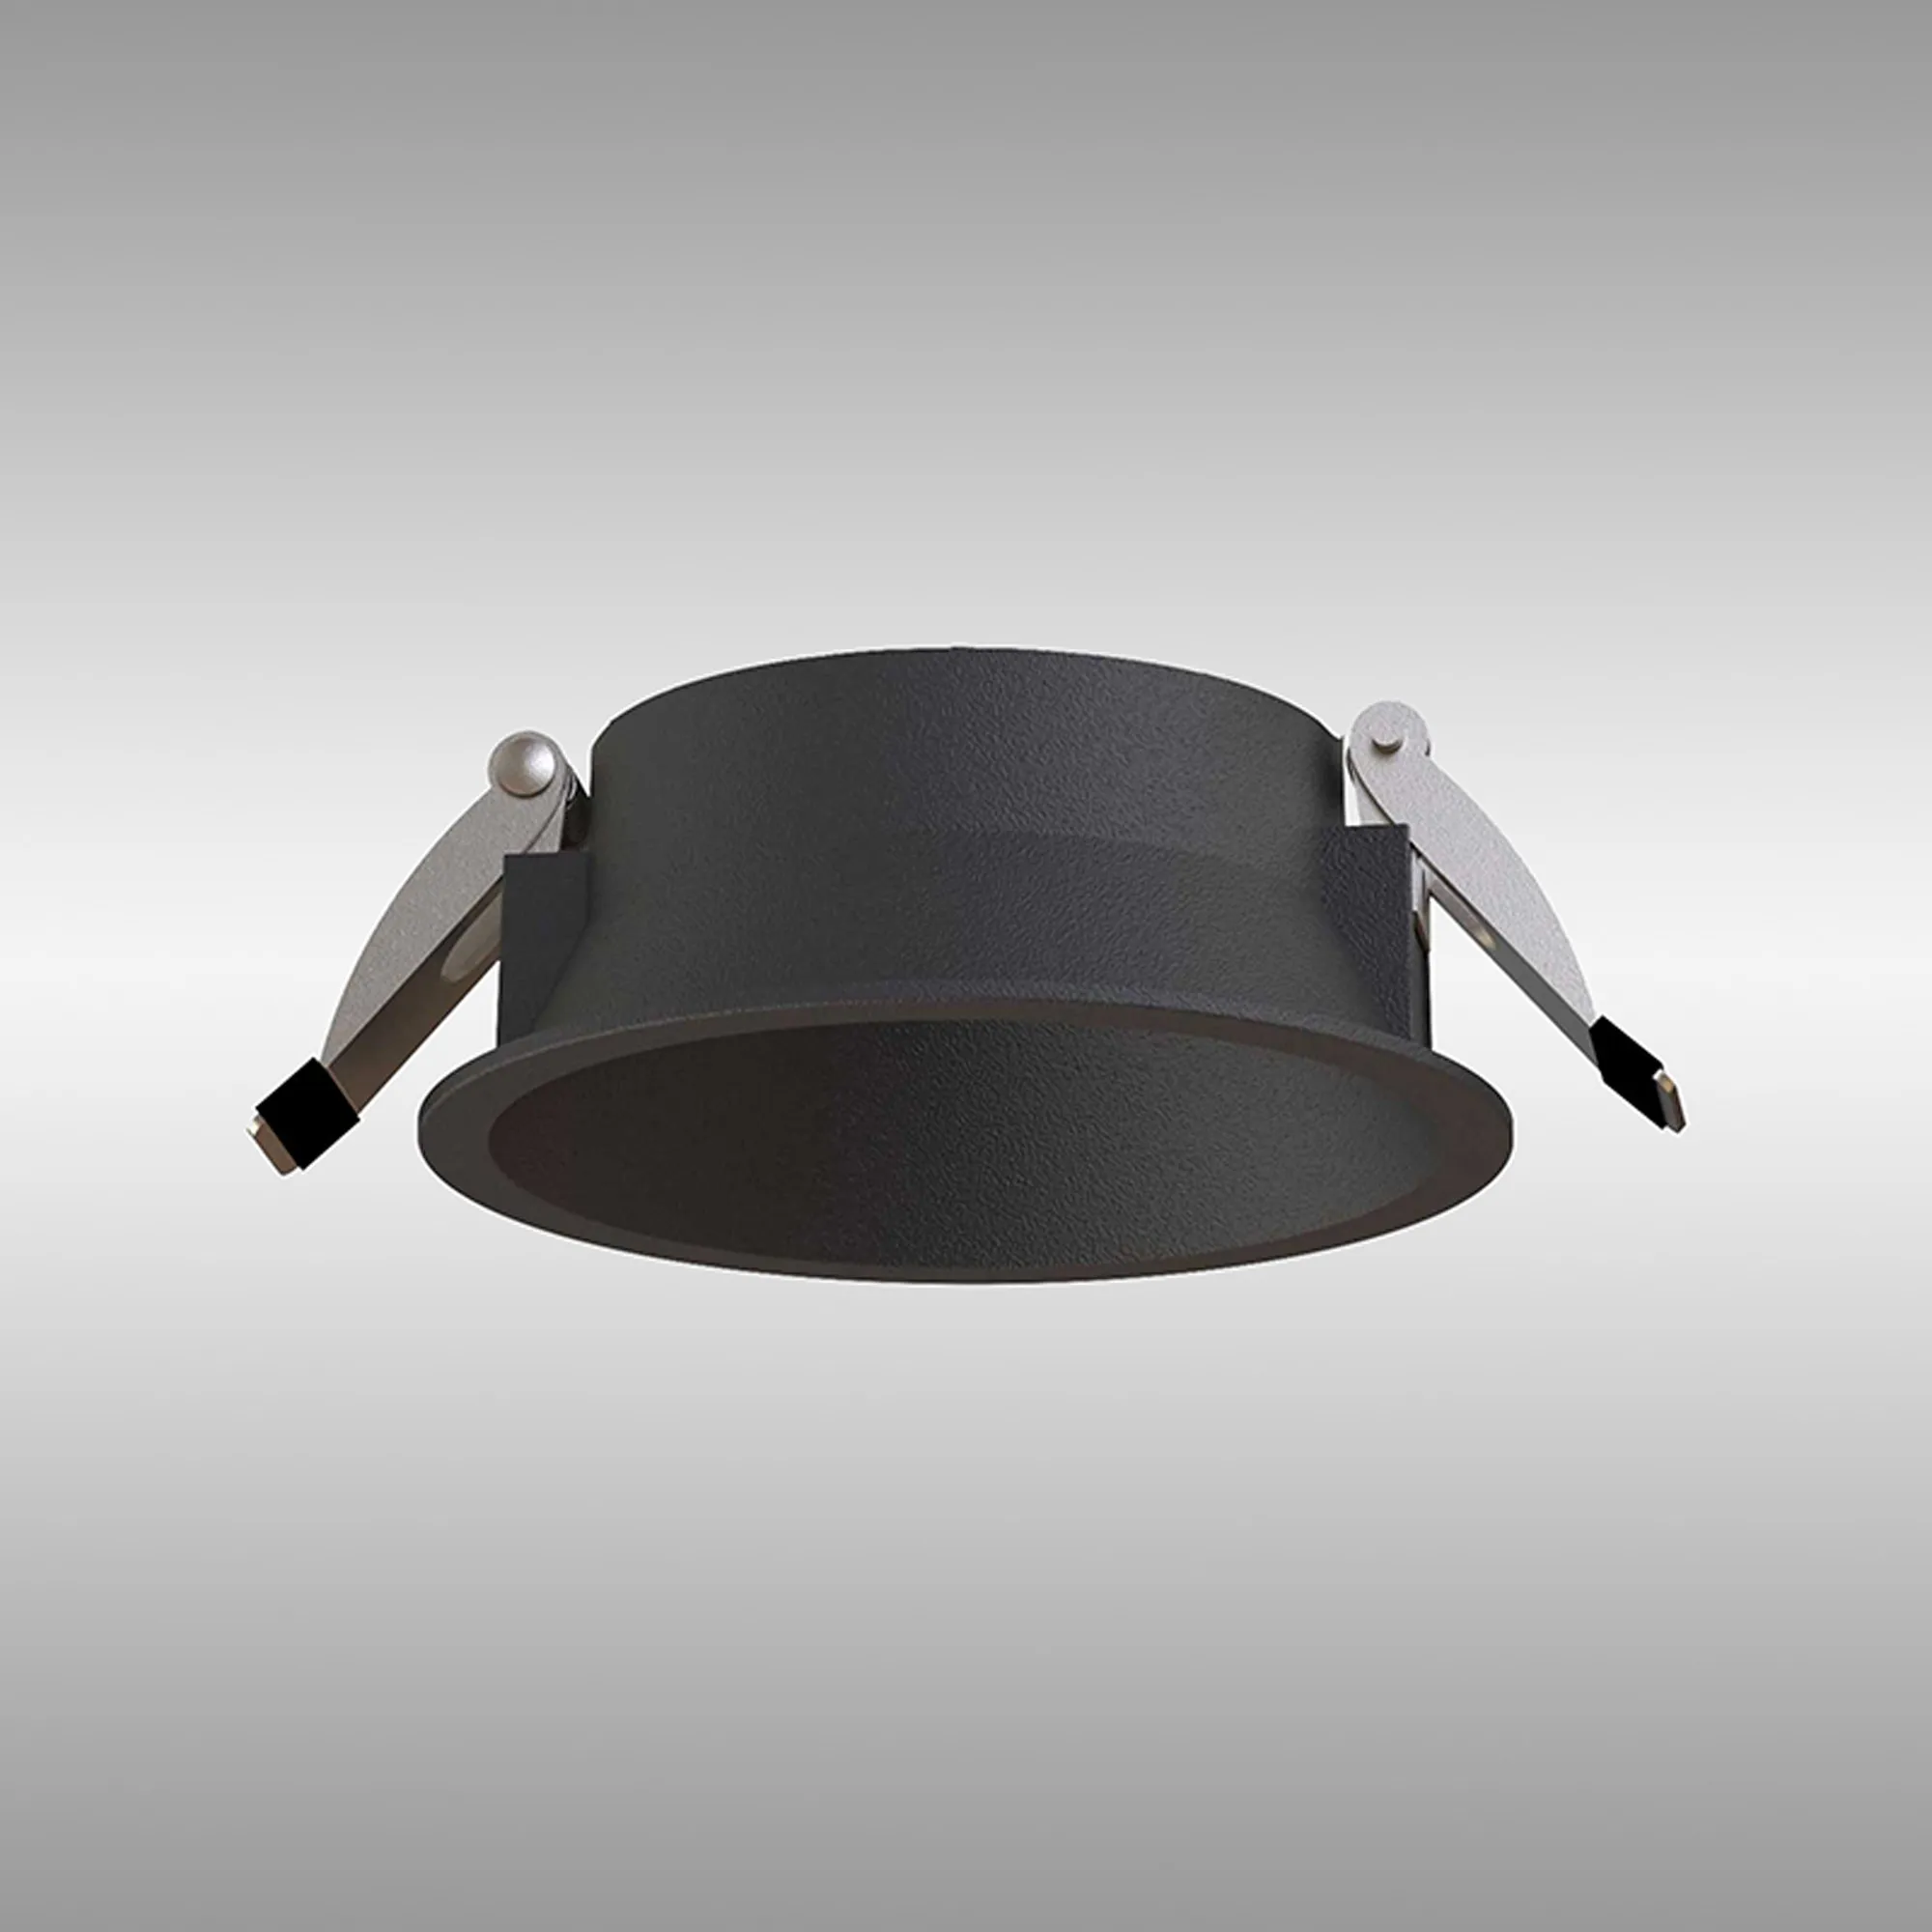 M8787  Sunset 108 x 98mm Recessed Base; Cut Out: 95mm; Black